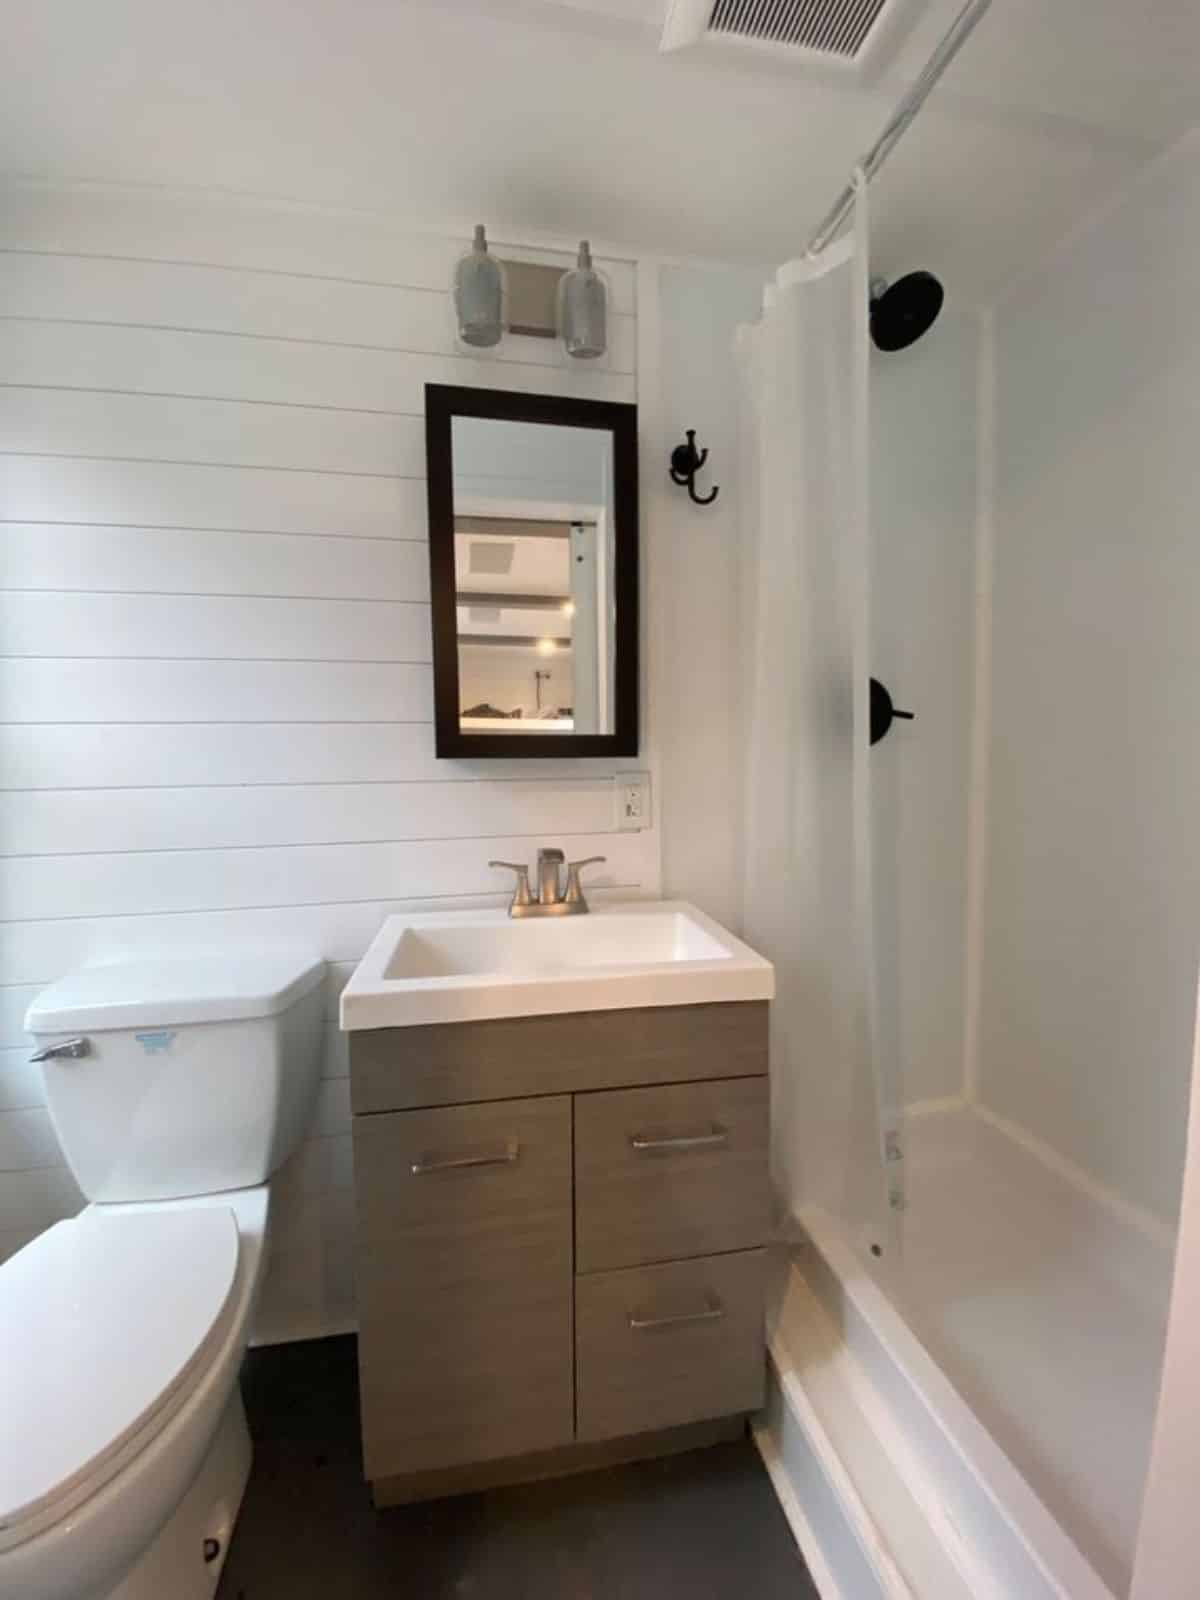 Bathroom area of solar powered tiny home has standard toilet, sink with vanity & mirror and shower area